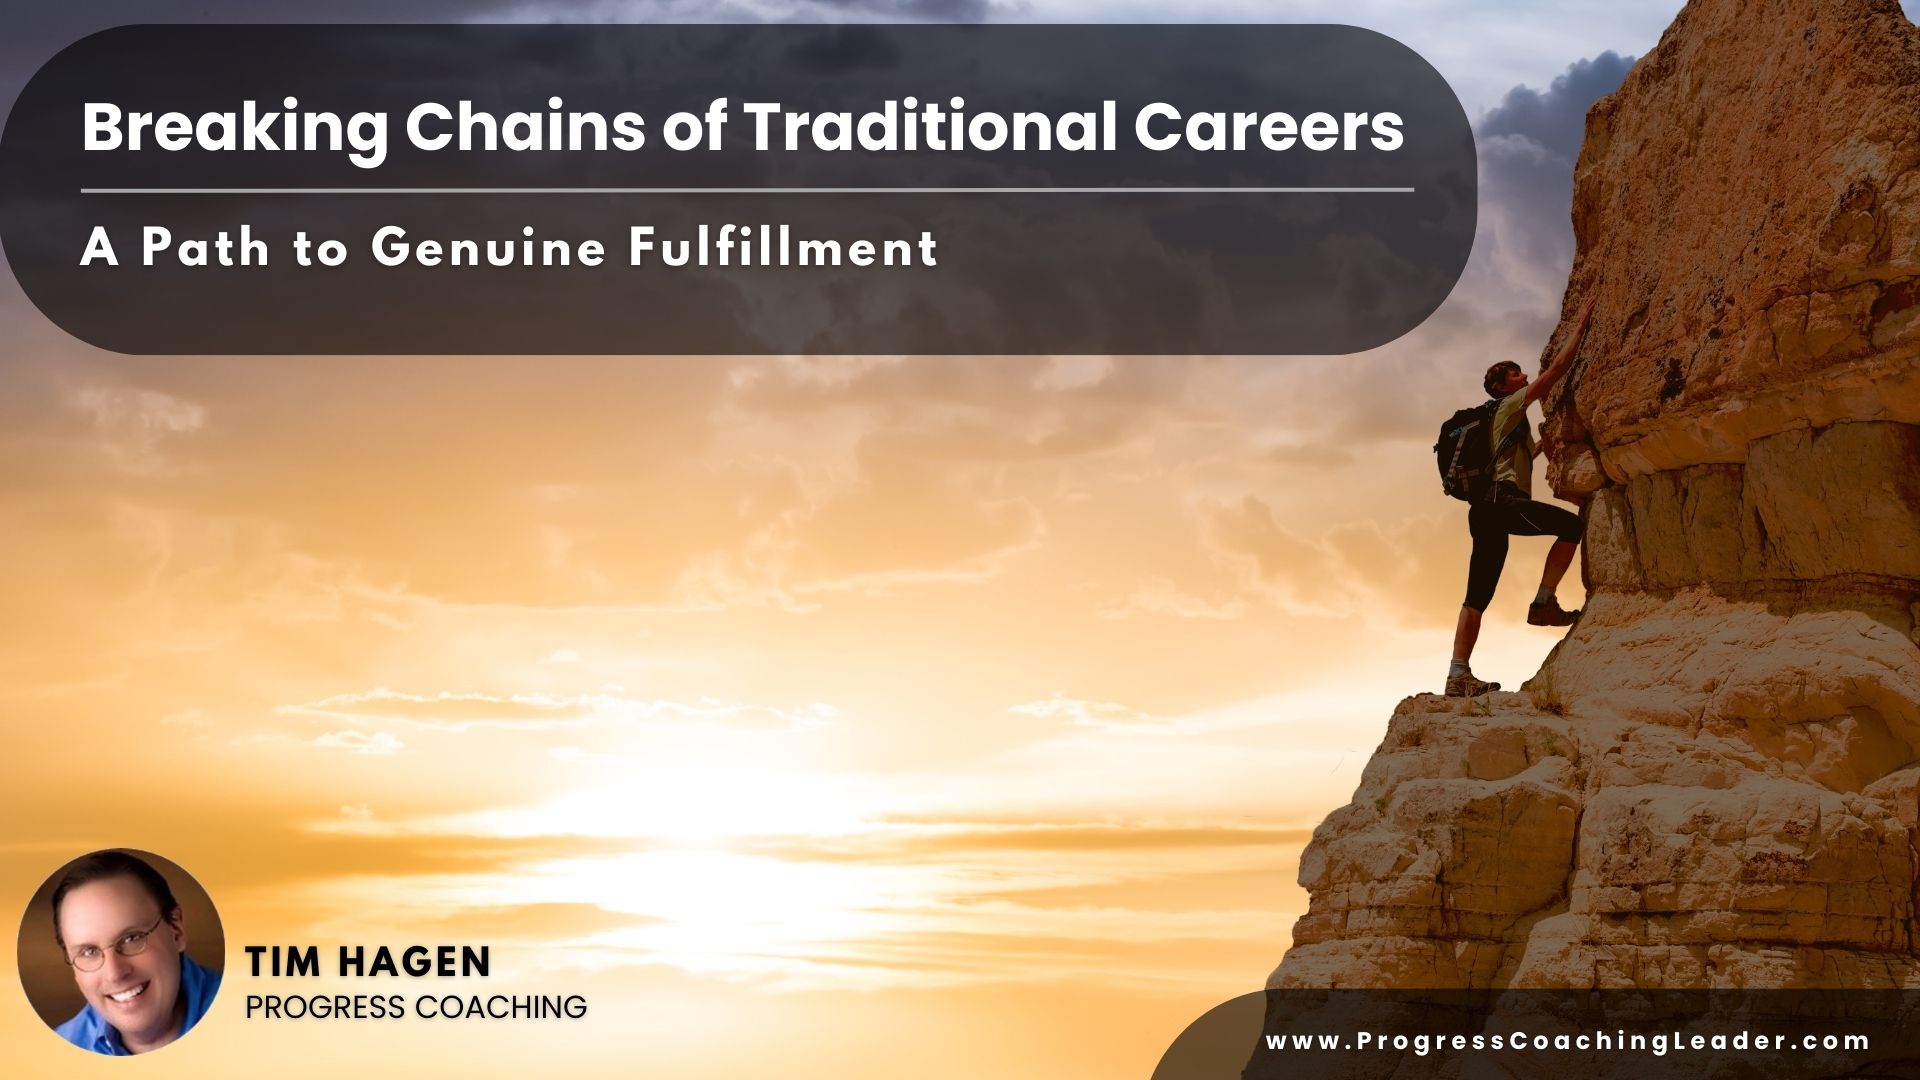 Breaking Chains of Traditional Careers: A Path to Genuine Fulfillment